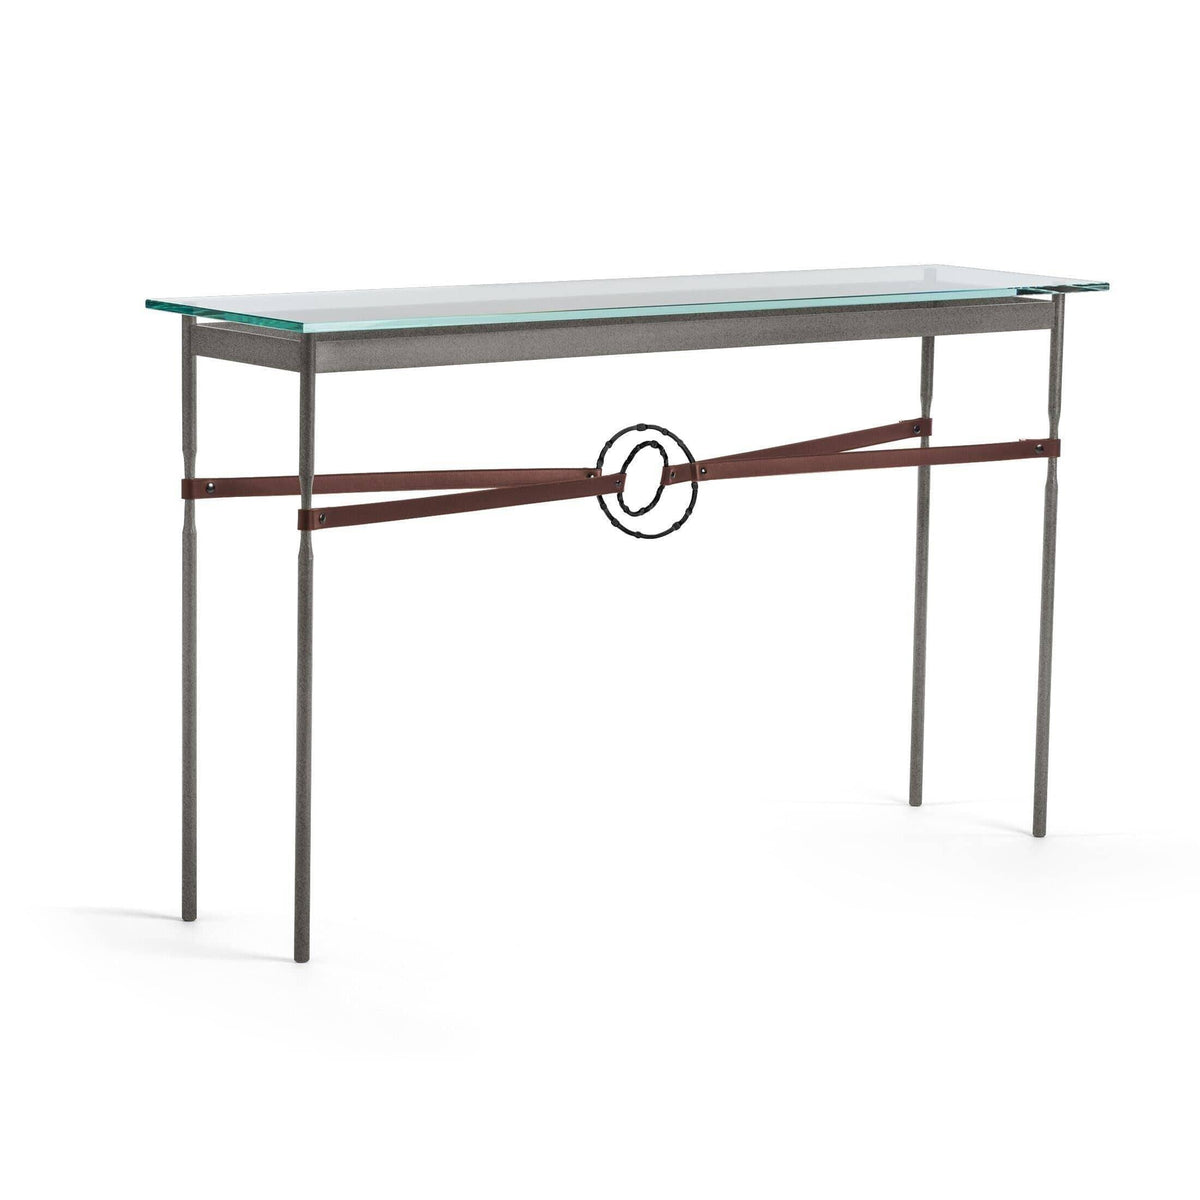 Hubbardton Forge - Equus Brown Leather Console Table - 750118-20-10-LB-VA0714 | Montreal Lighting & Hardware